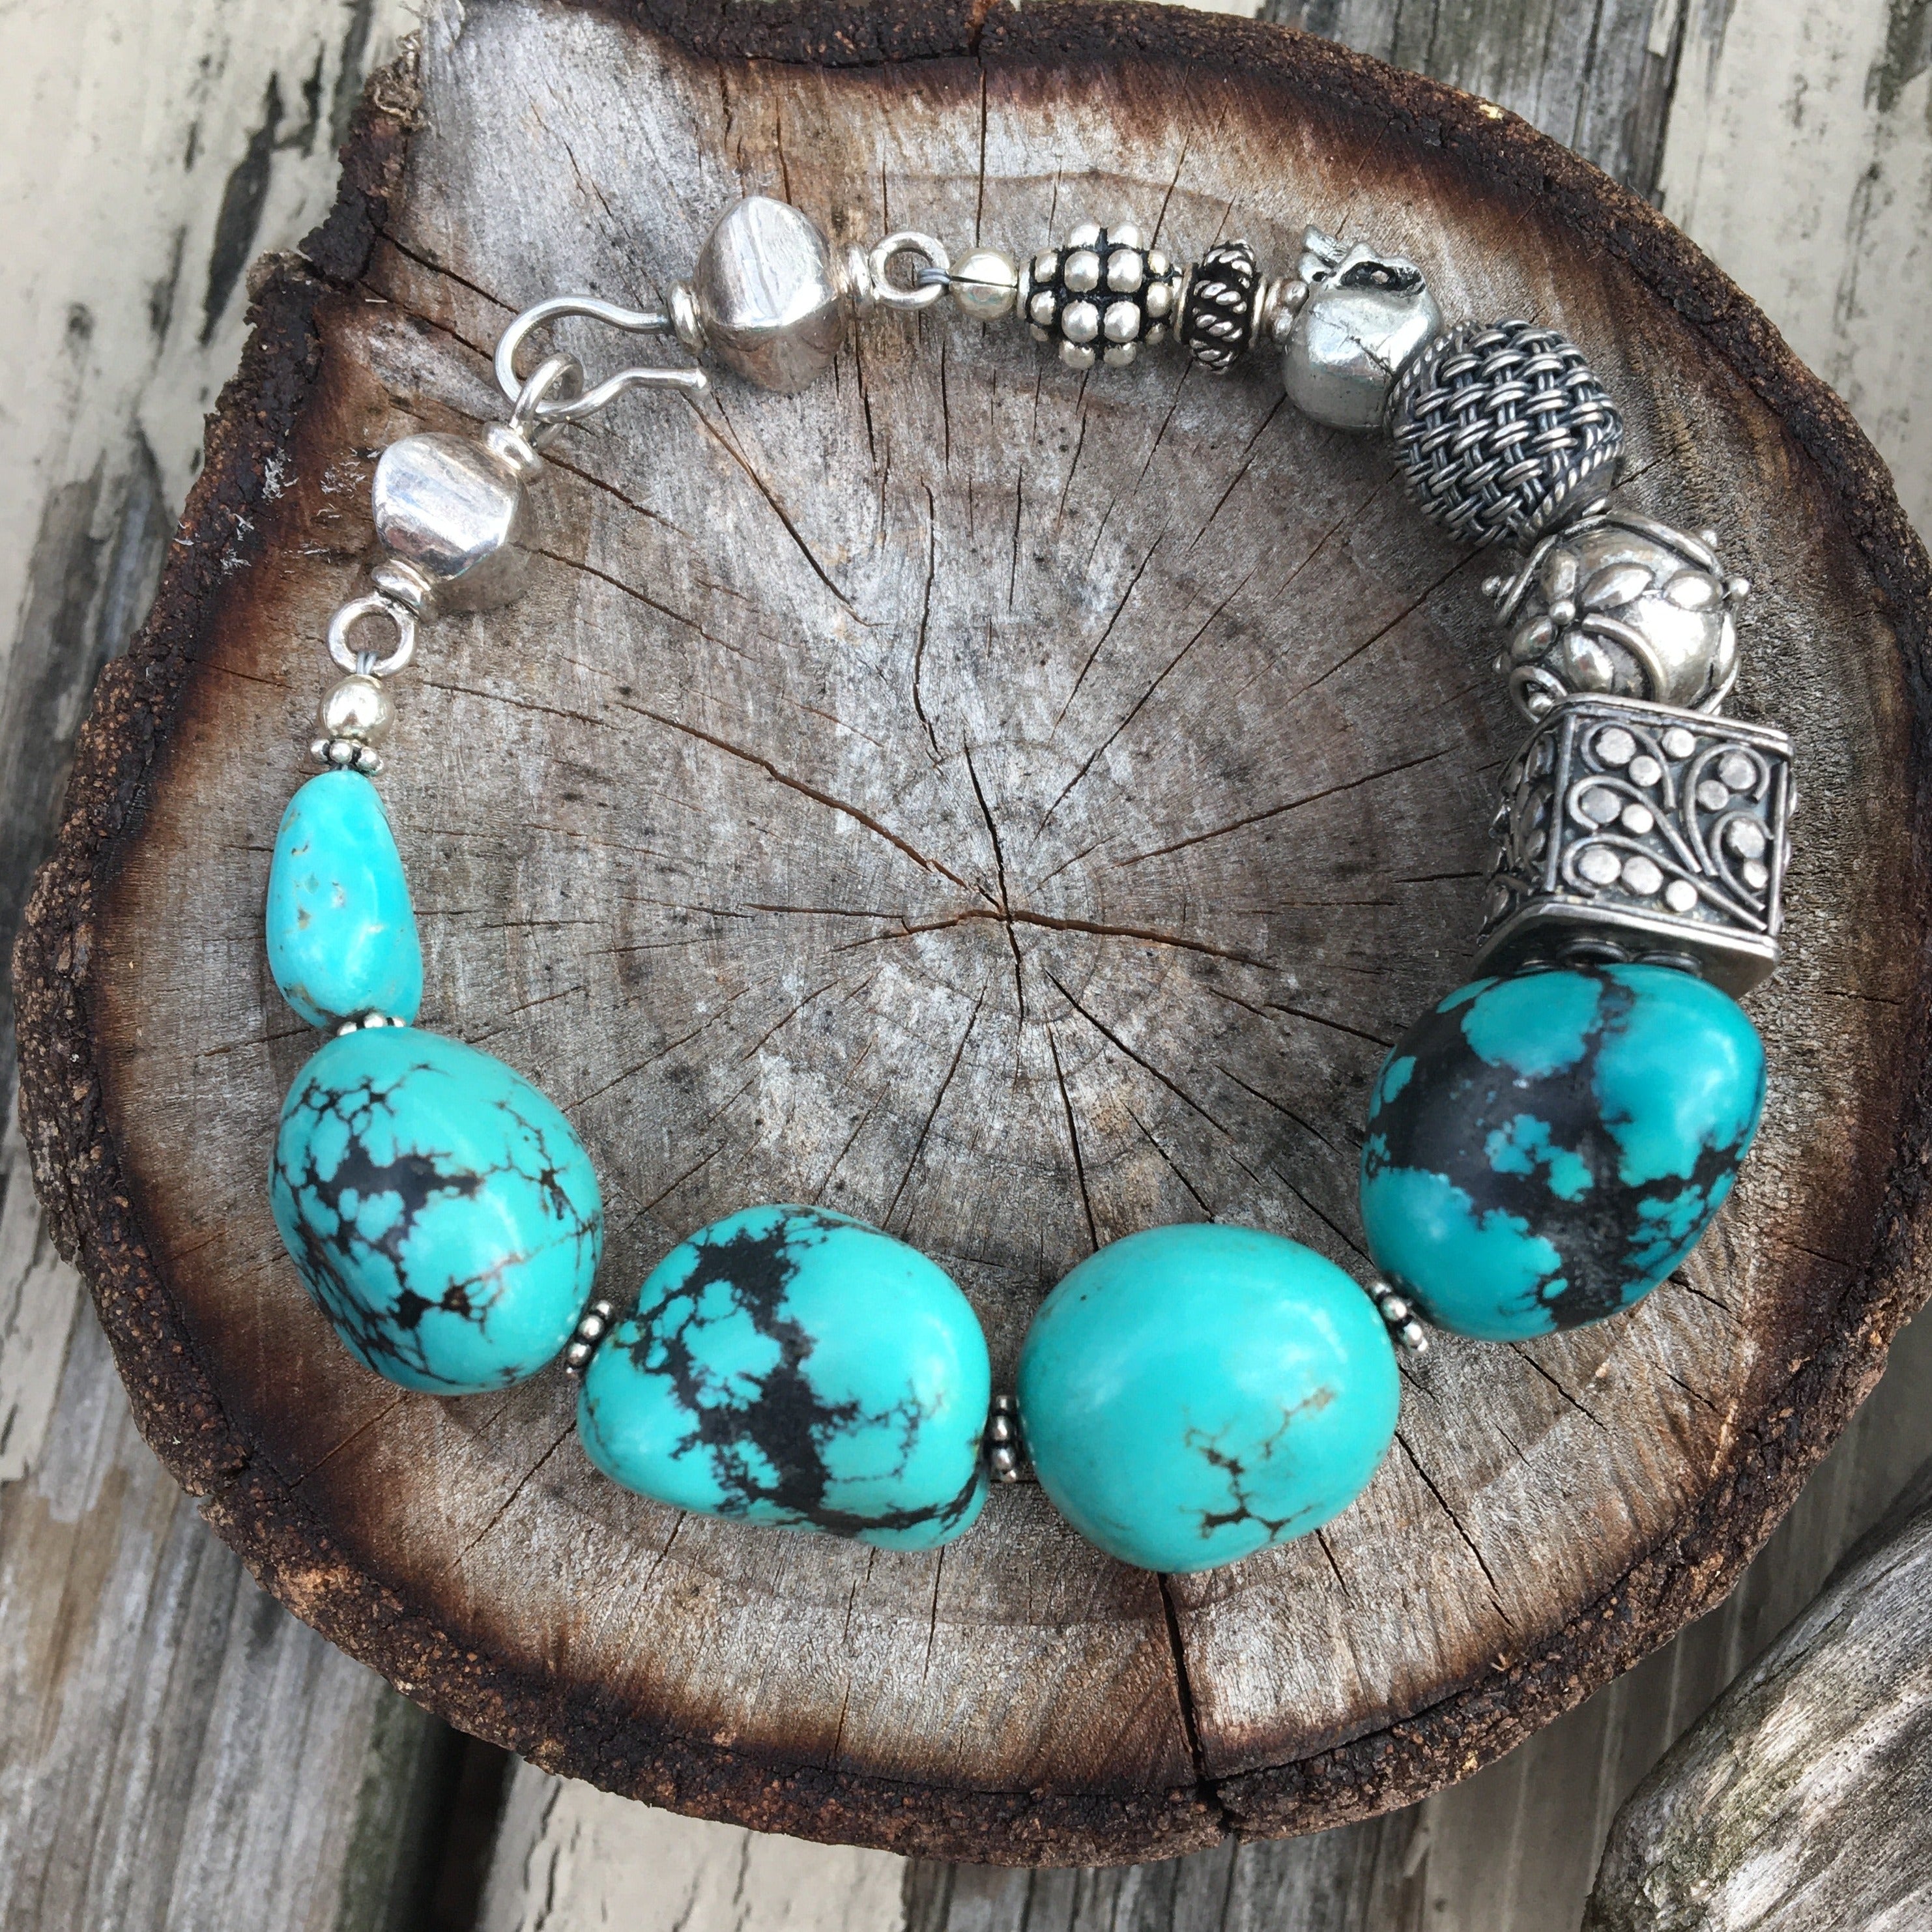 Turquoise and Bali Silver Beaded Bracelet